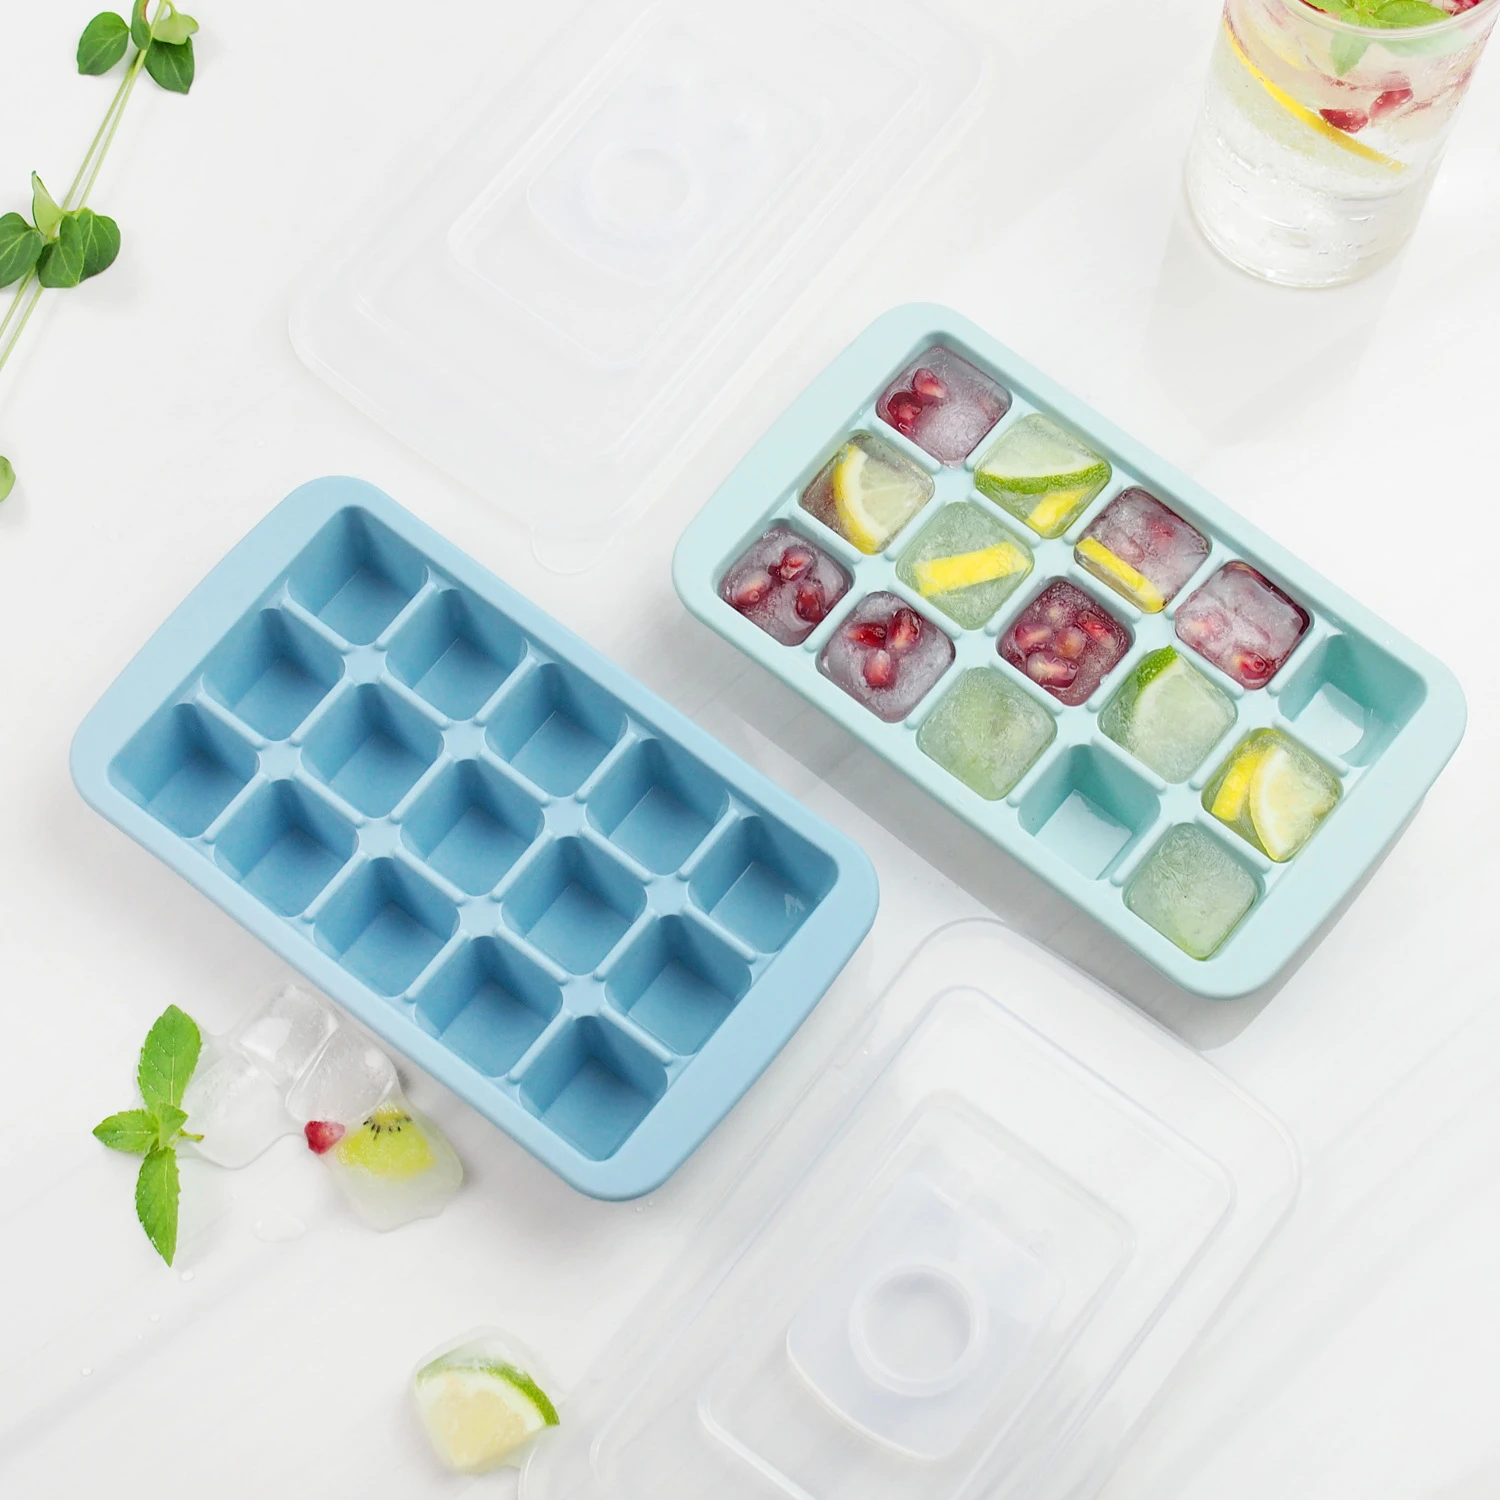 Creative Water Inlet Design 15 Silicone Ice Cube Trays with Lid